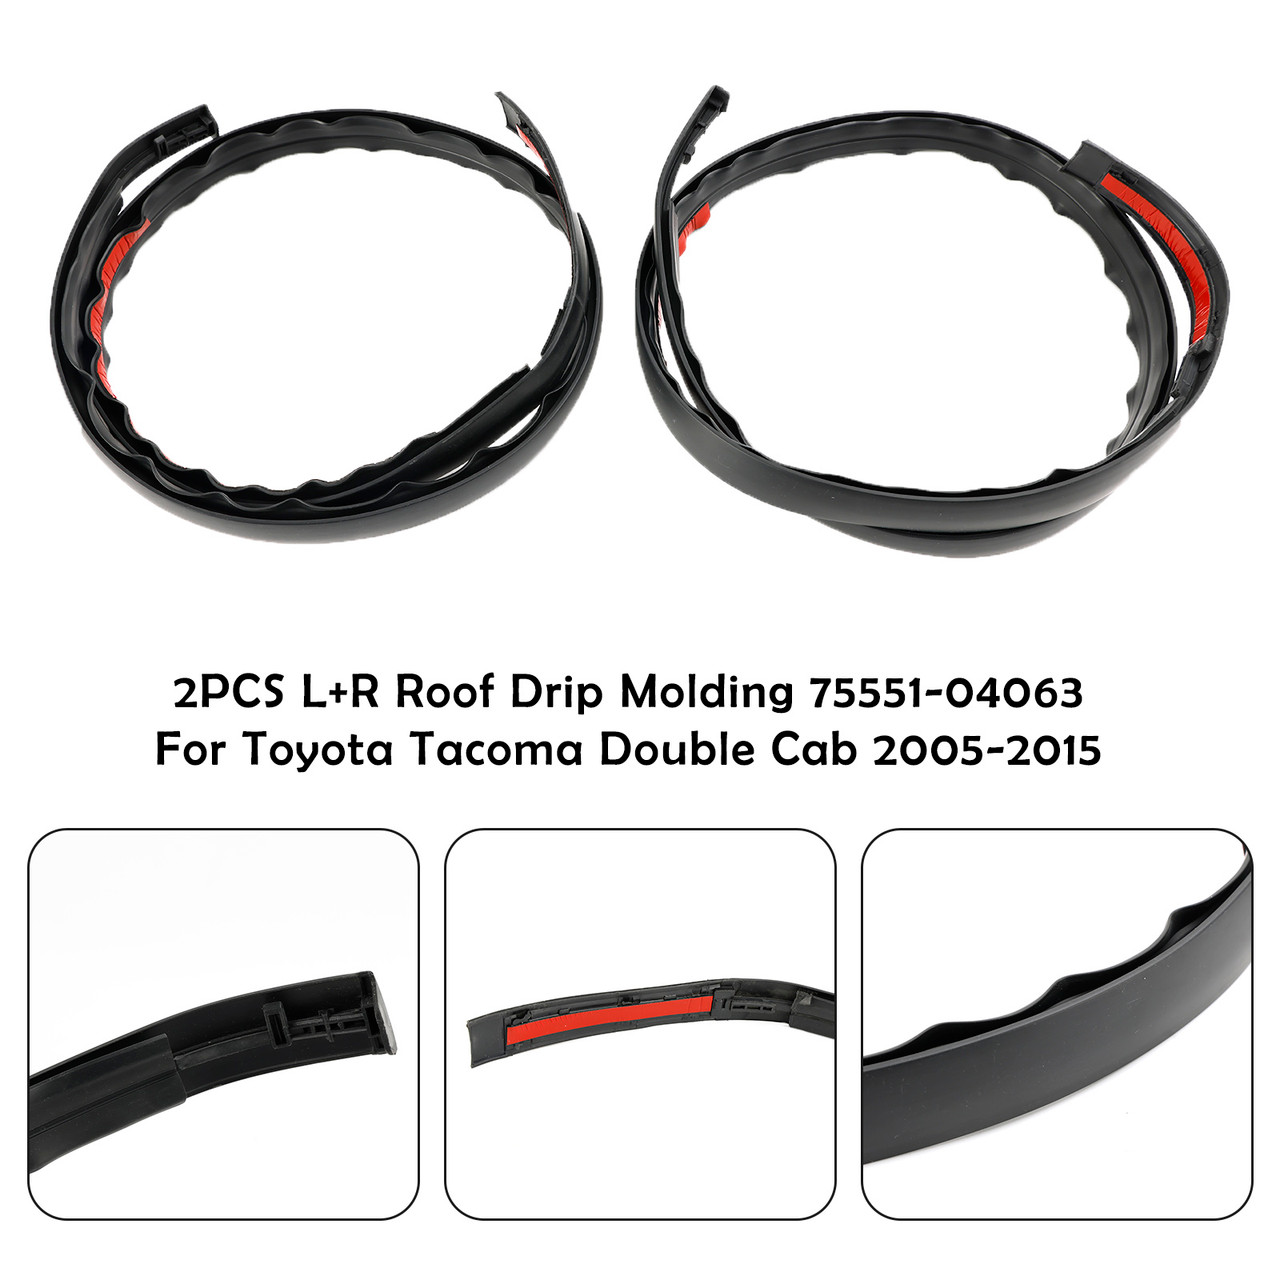 2PCS L+R Roof Drip Molding 75551-04063 For Toyota Tacoma Double Cab 2005-2015